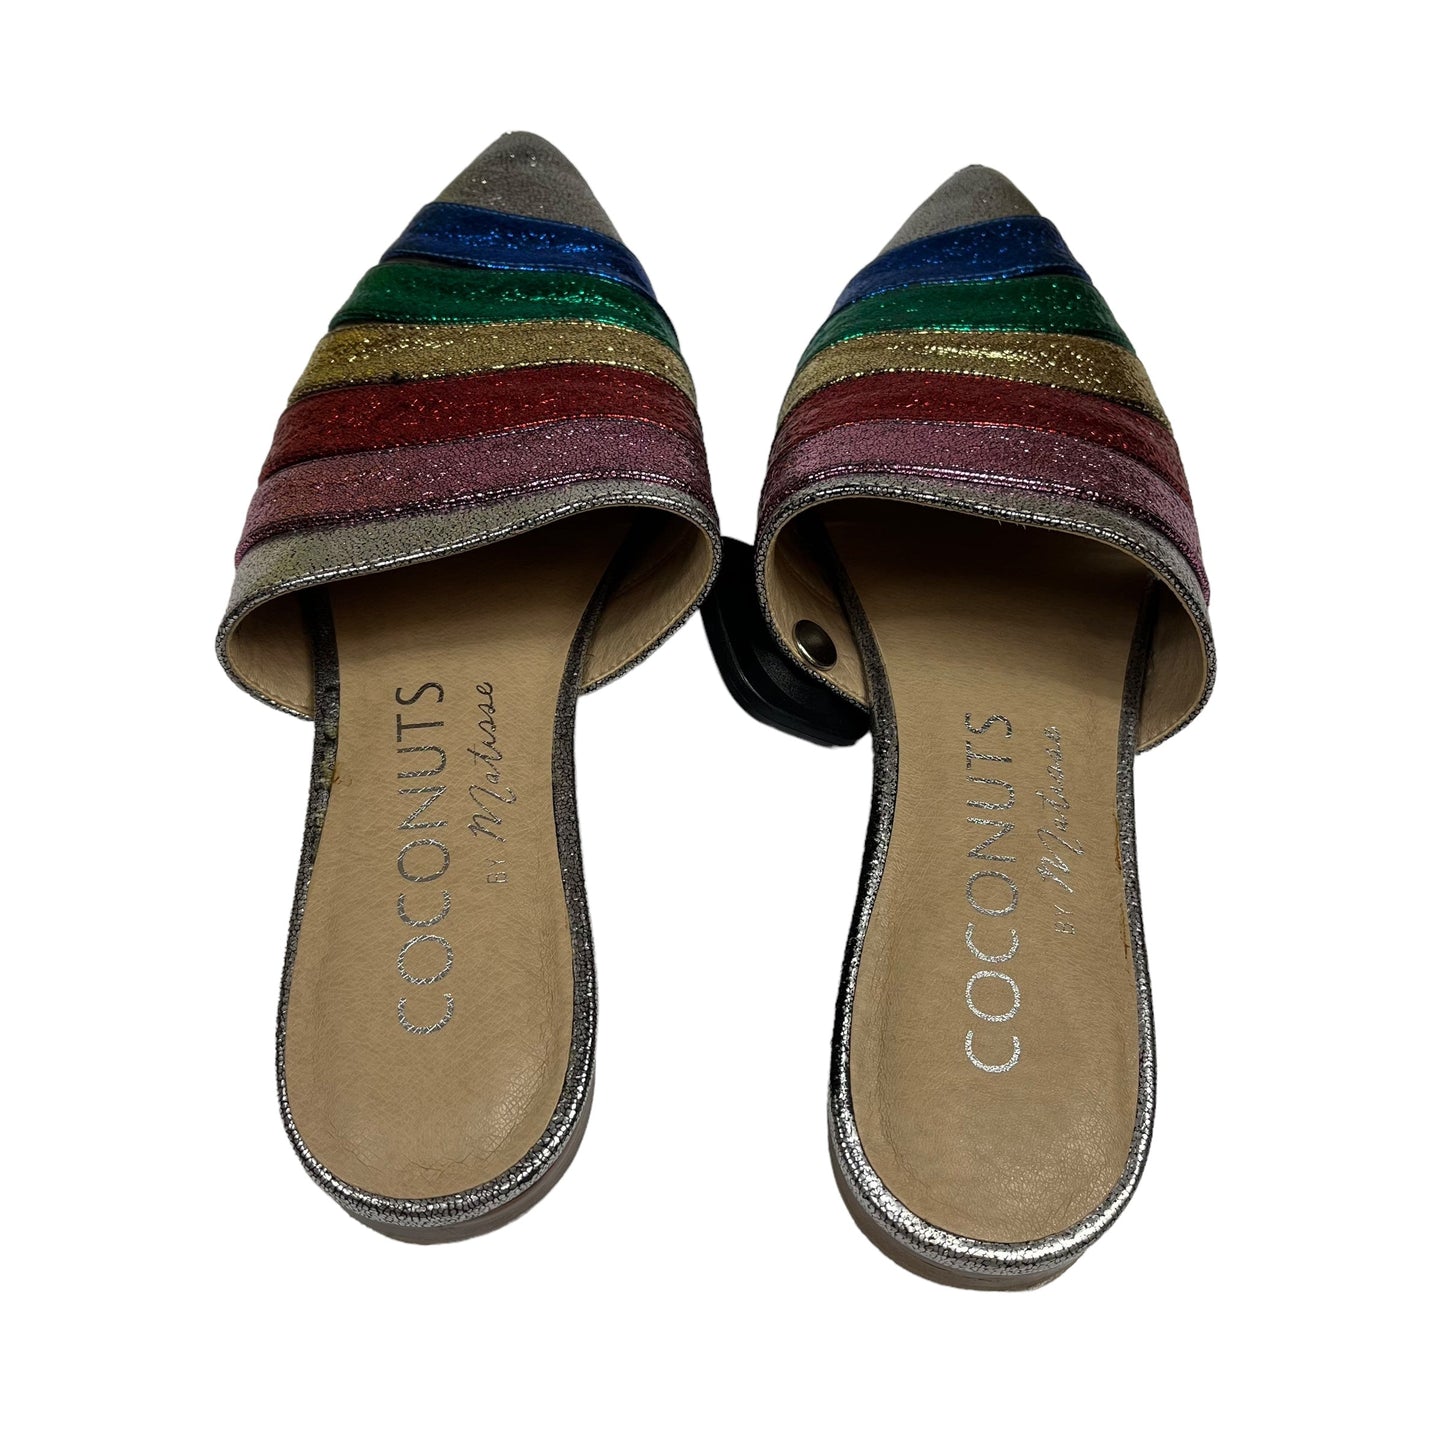 Shoes Flats By Coconuts by Matisse  Size: 7